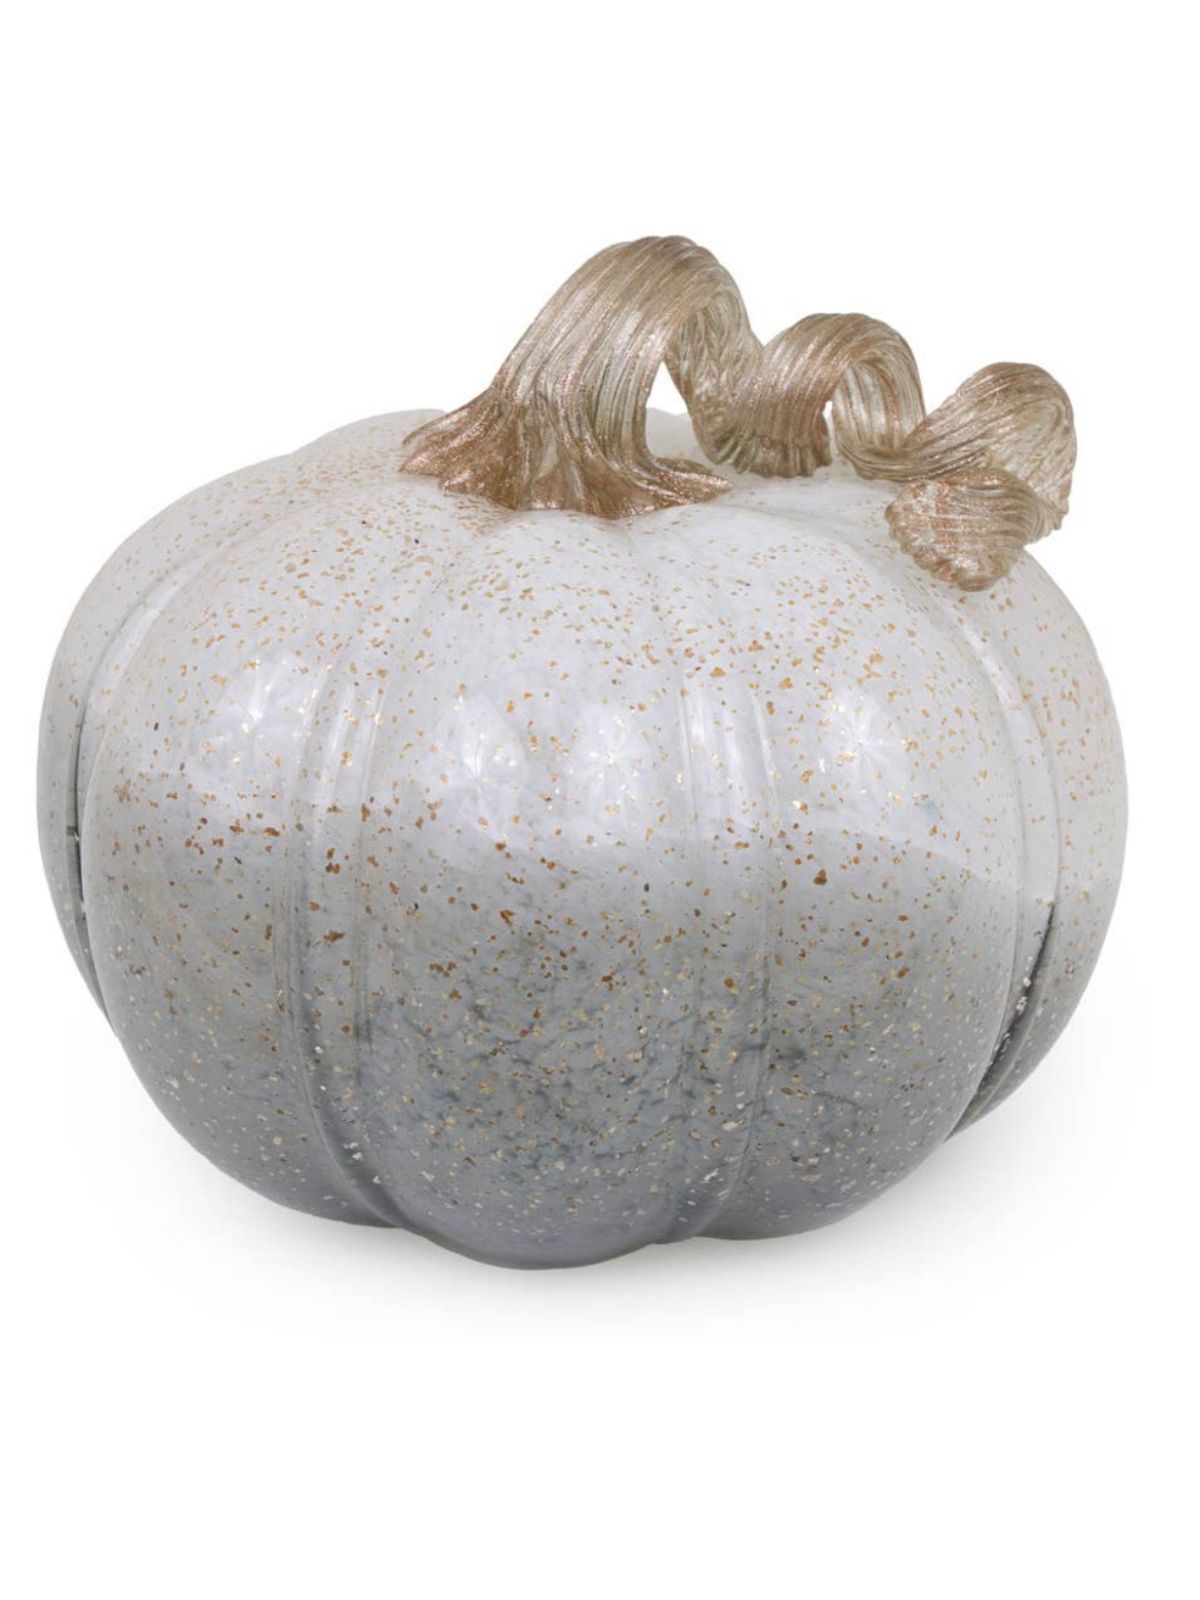 This Large Twilight Grey Glass Pumpkin is perfect for decorating your home during fall season! This hand-blown glass pumpkin features an abstract grey and gold pattern with a curly gold stem.